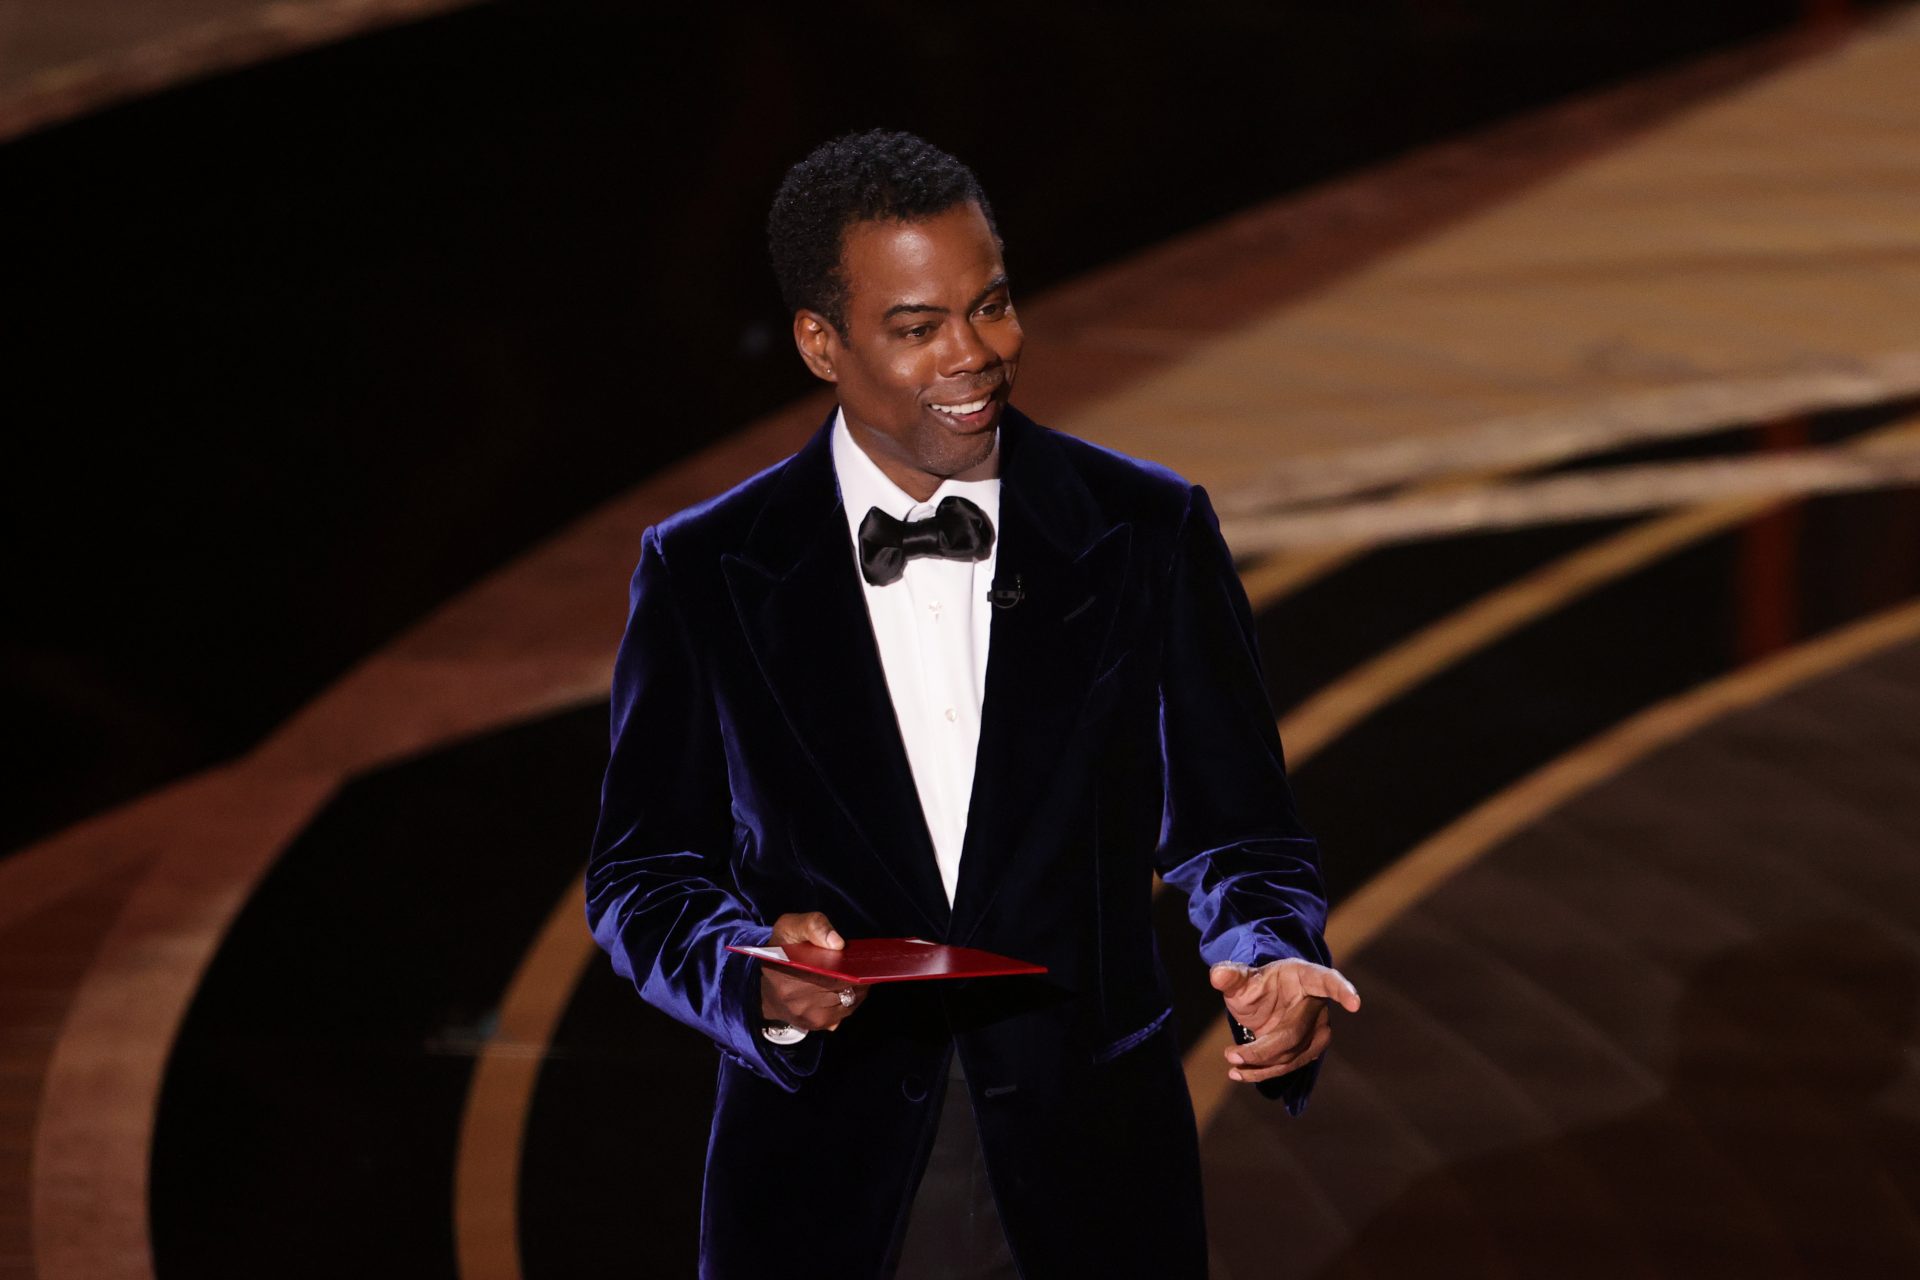 Chris Rock Reportedly Shared That He Turned Down An Invitation To Host The Oscars Next Year 